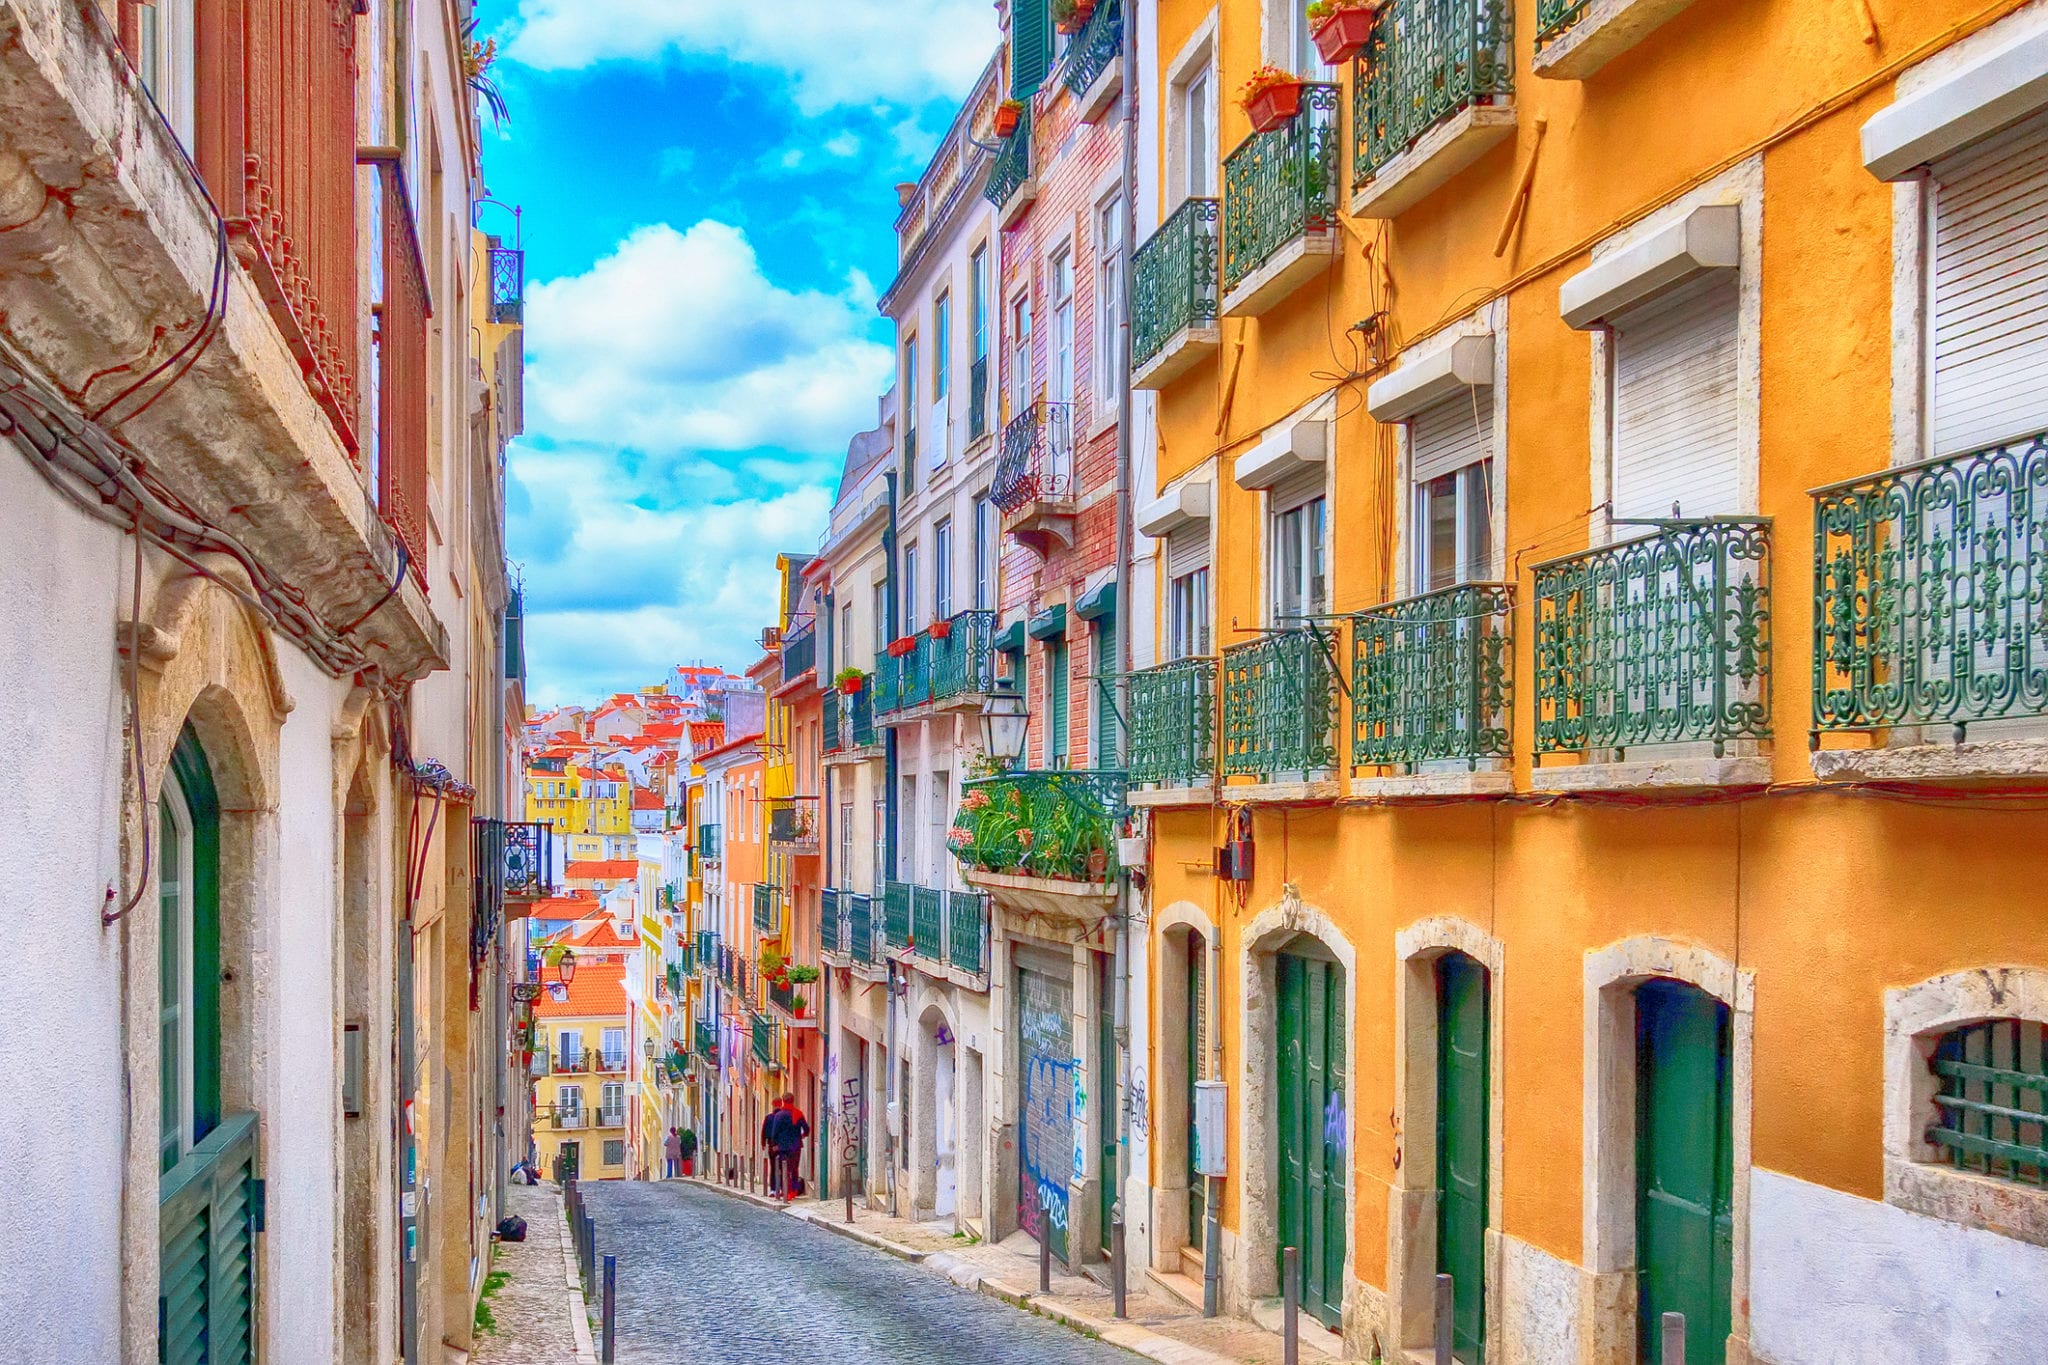 Cost of Living in Portugal: A Foreigner's Guide